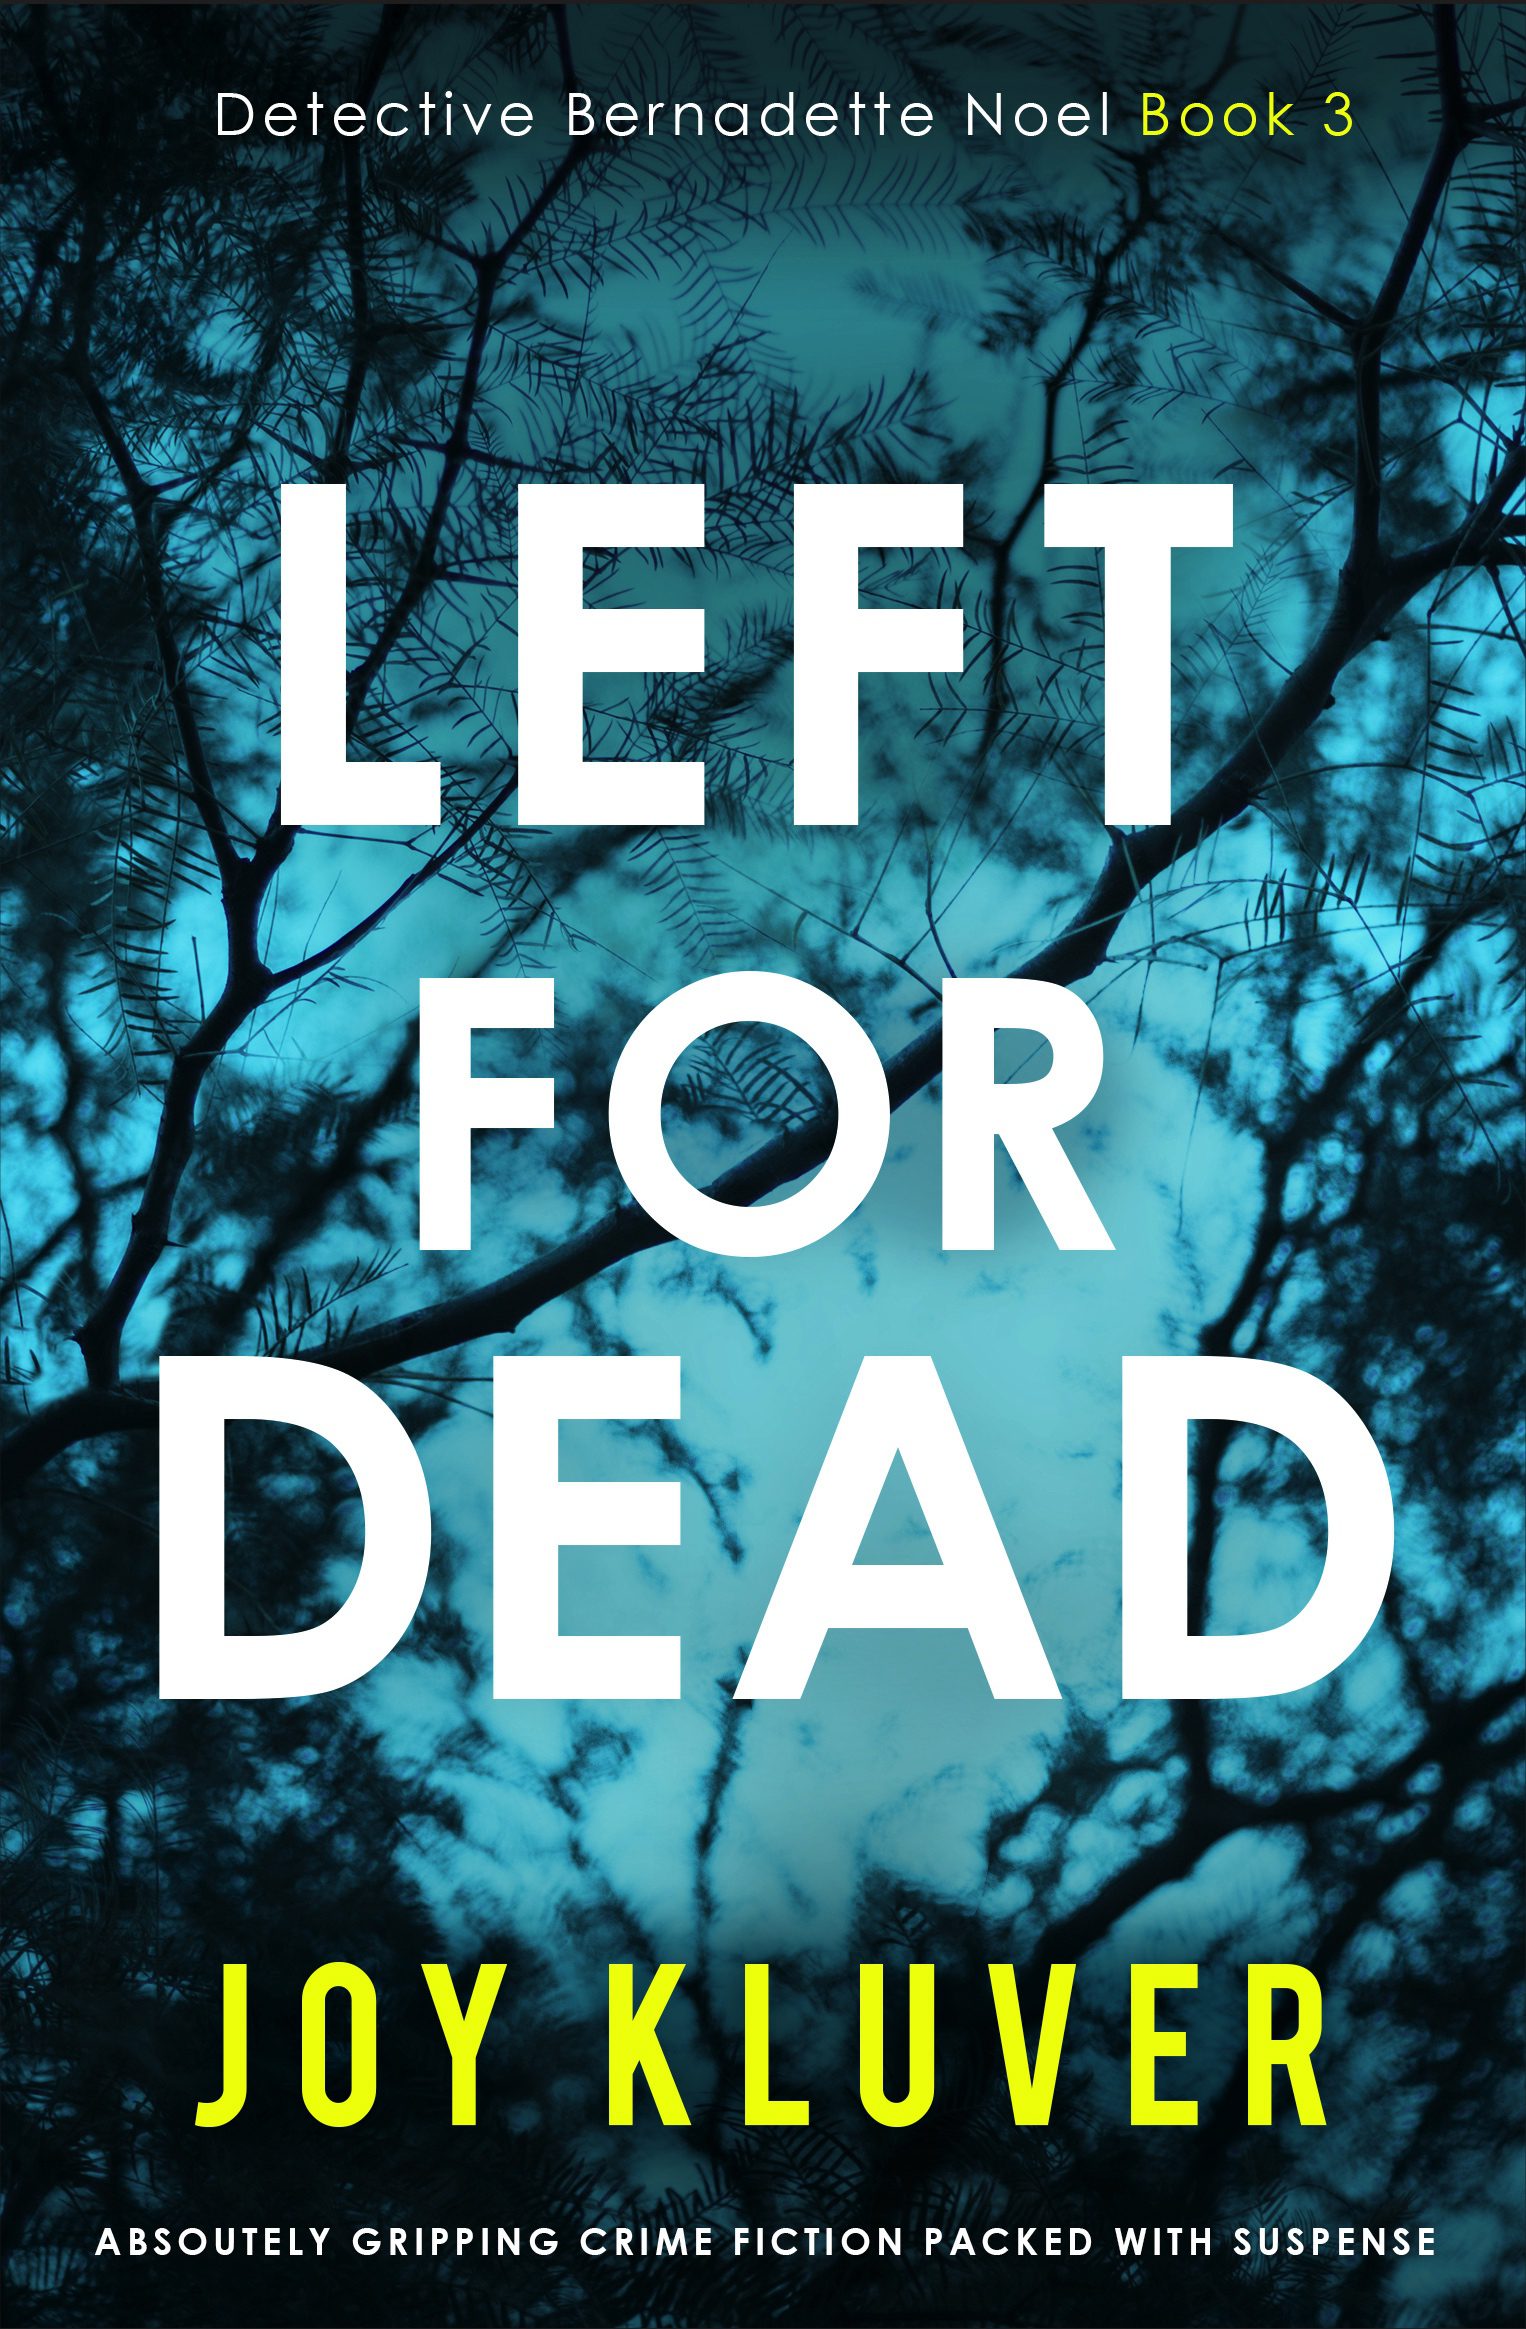 Left For Dead book cover